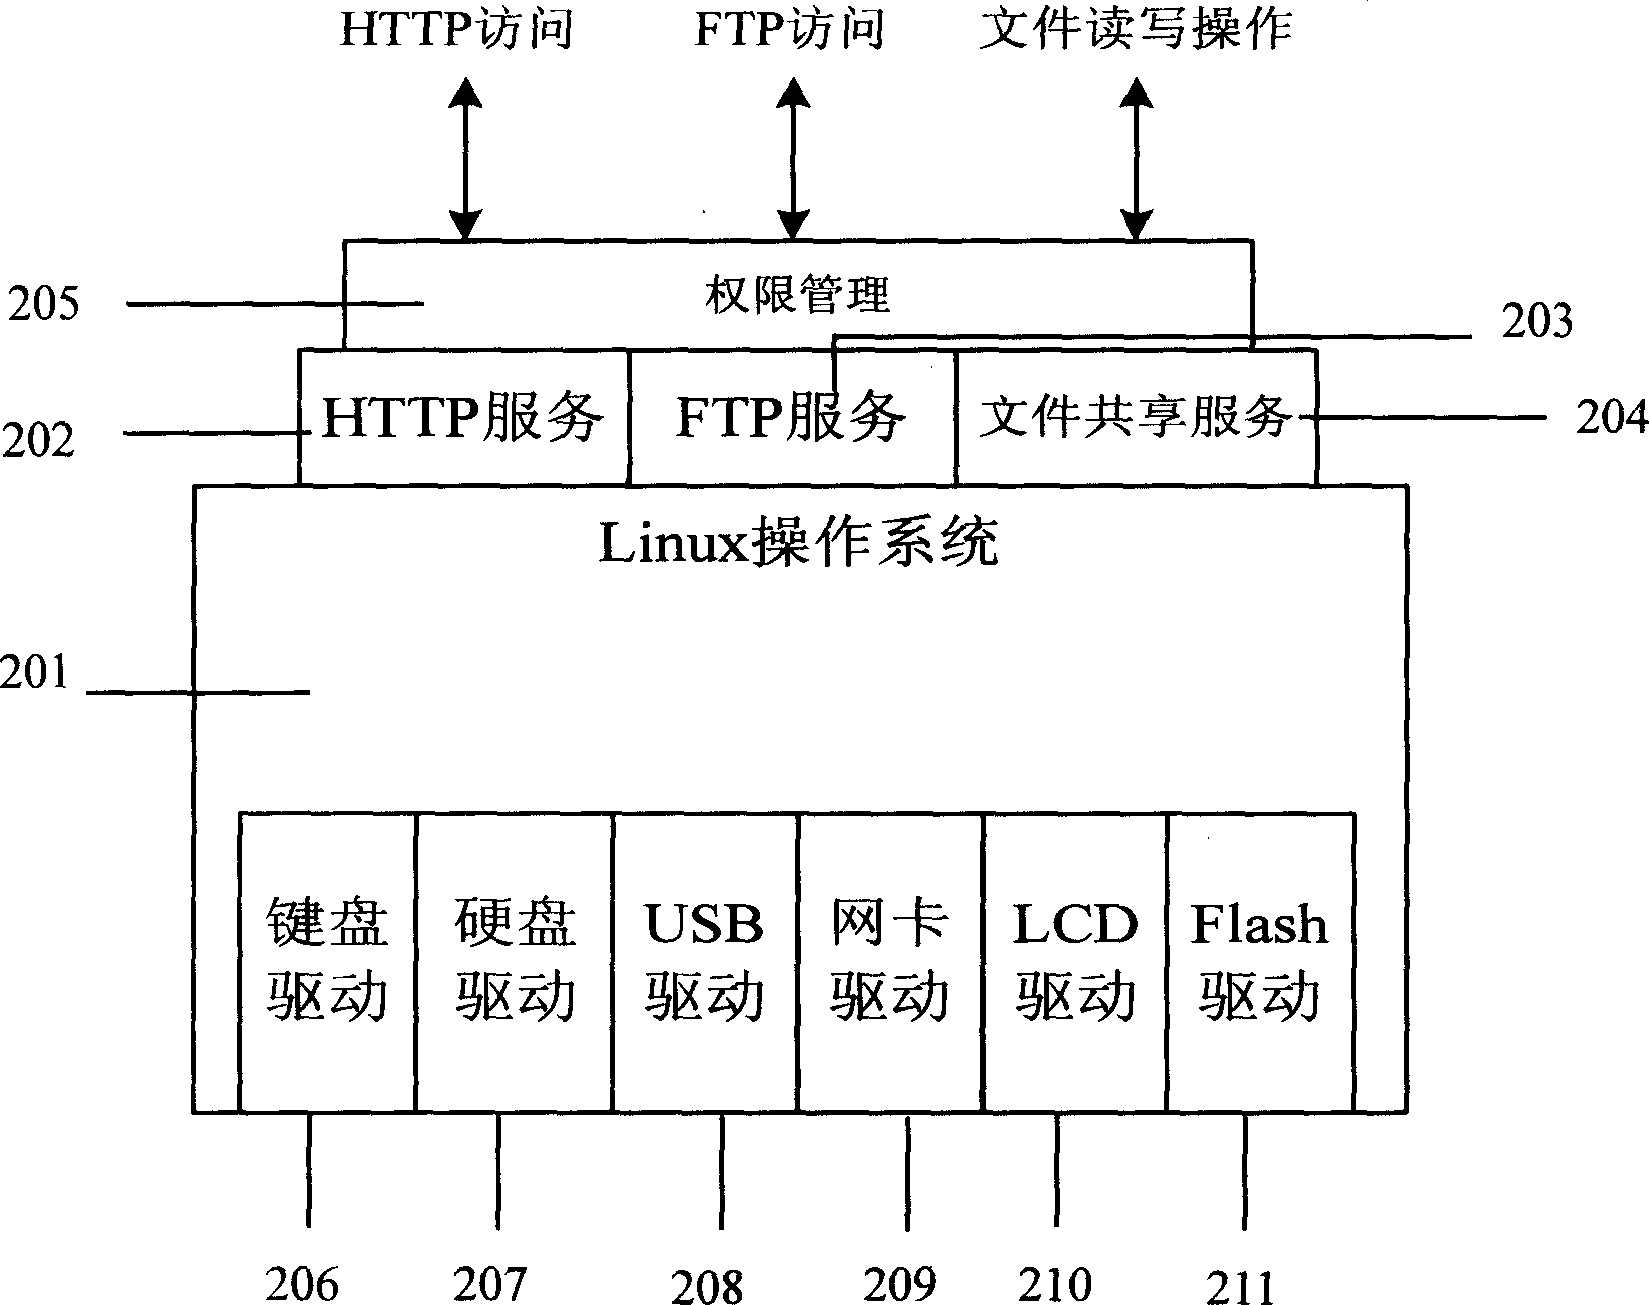 Network affixed storage device